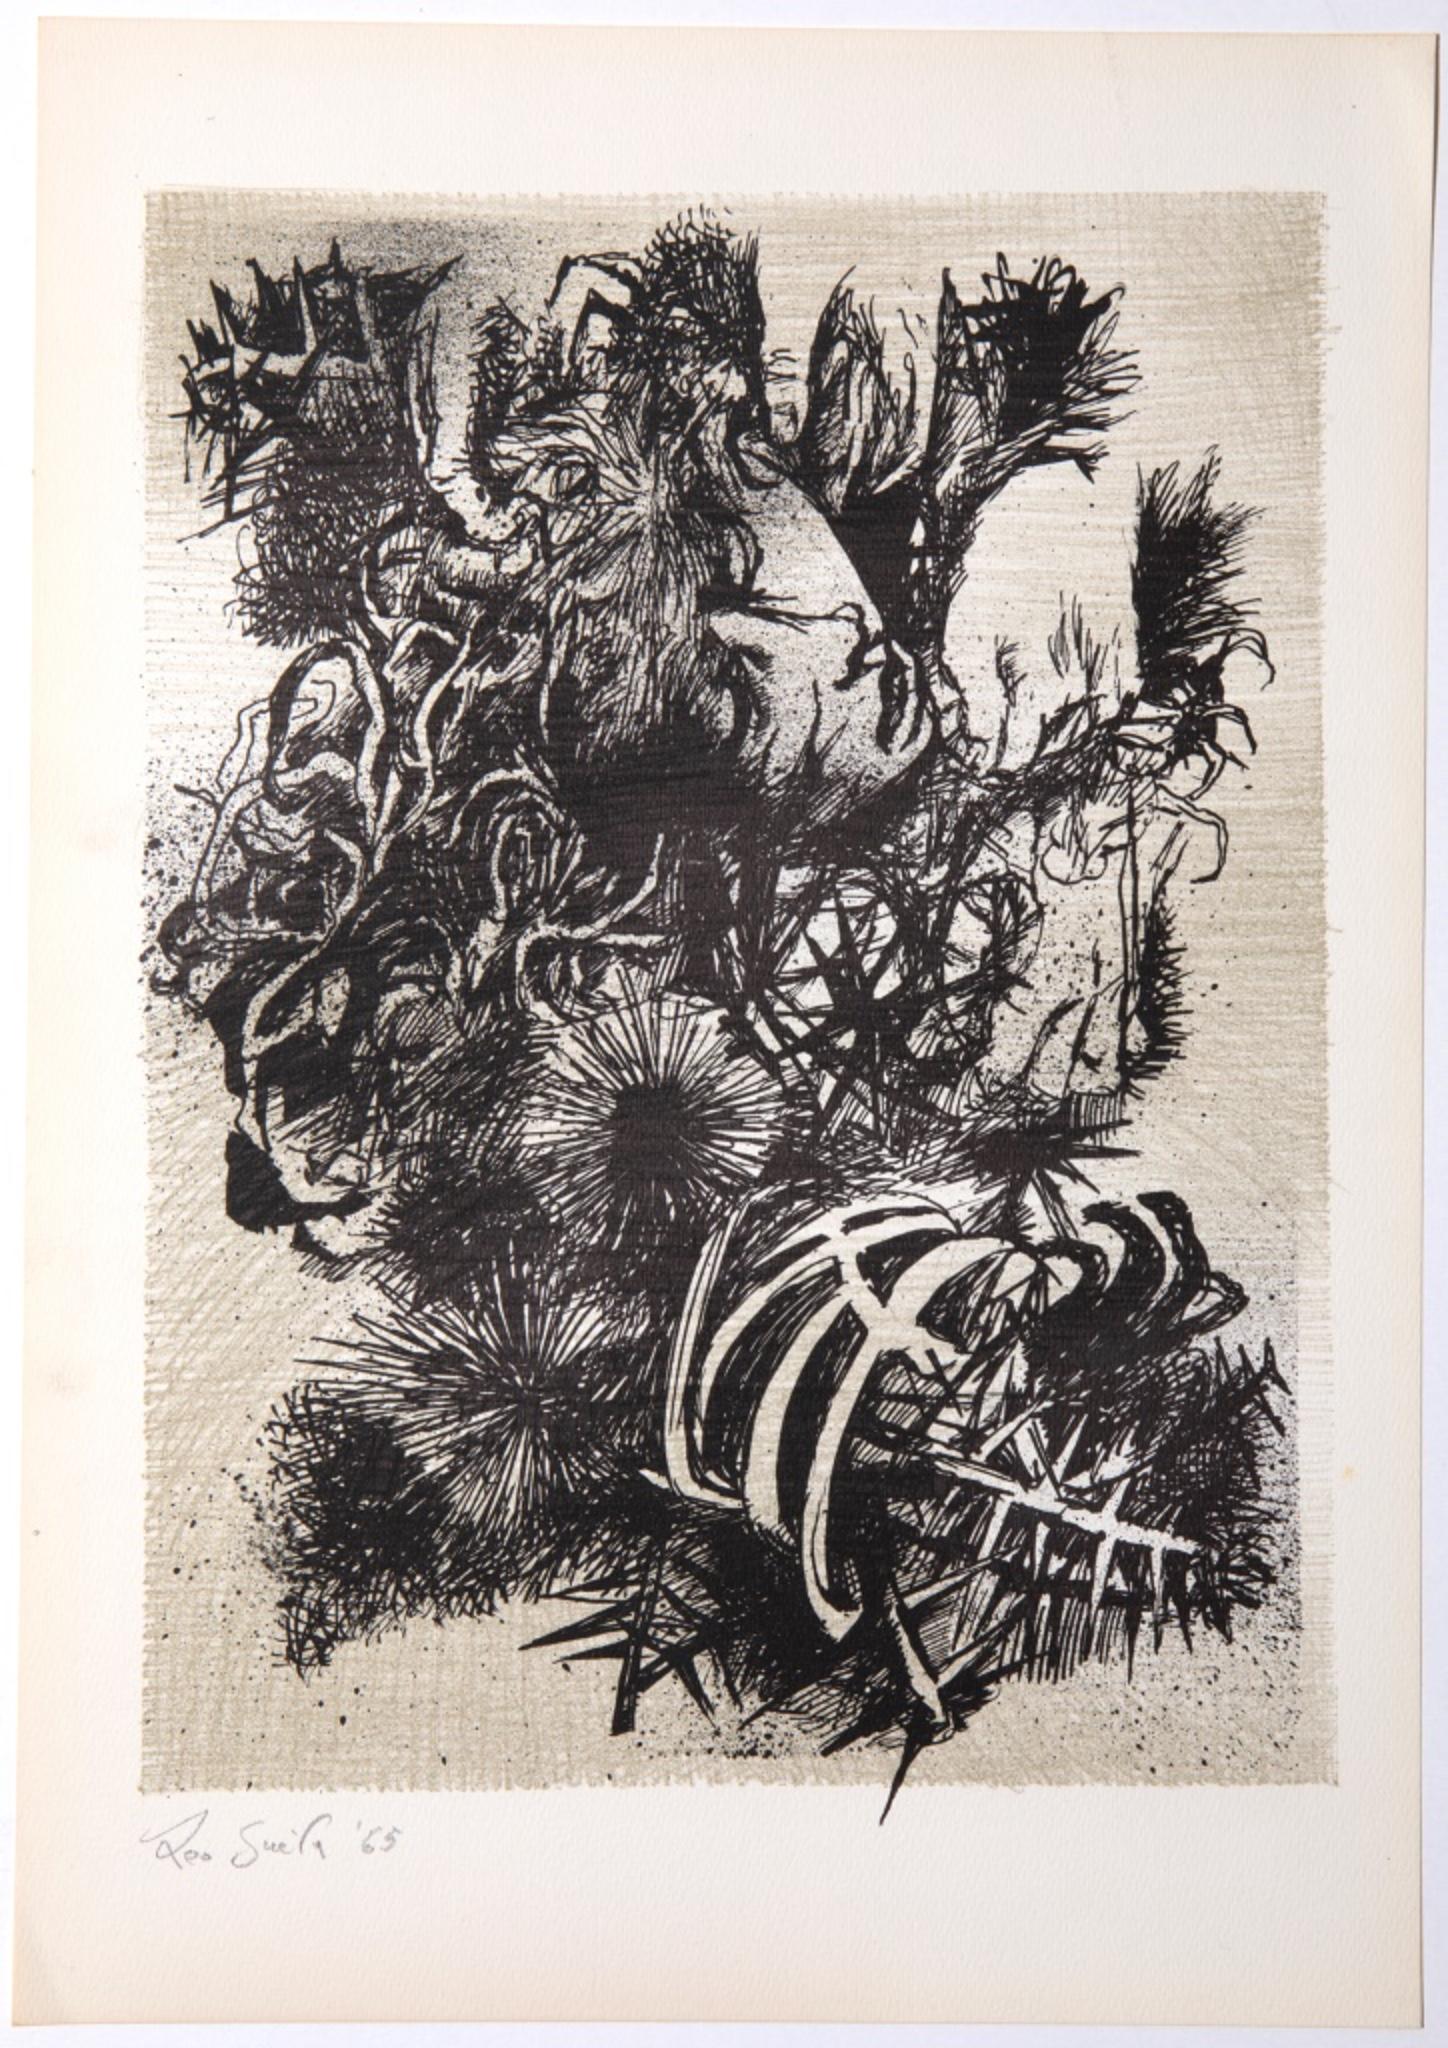 Decadence 3 is an original etching realized by Leo Guida in 1965.

The artwork is hand-signed by the artist on the lower left corner.

Leo Guida artist sensitive to current issues, artist movement and techniques, has been able to weave with many